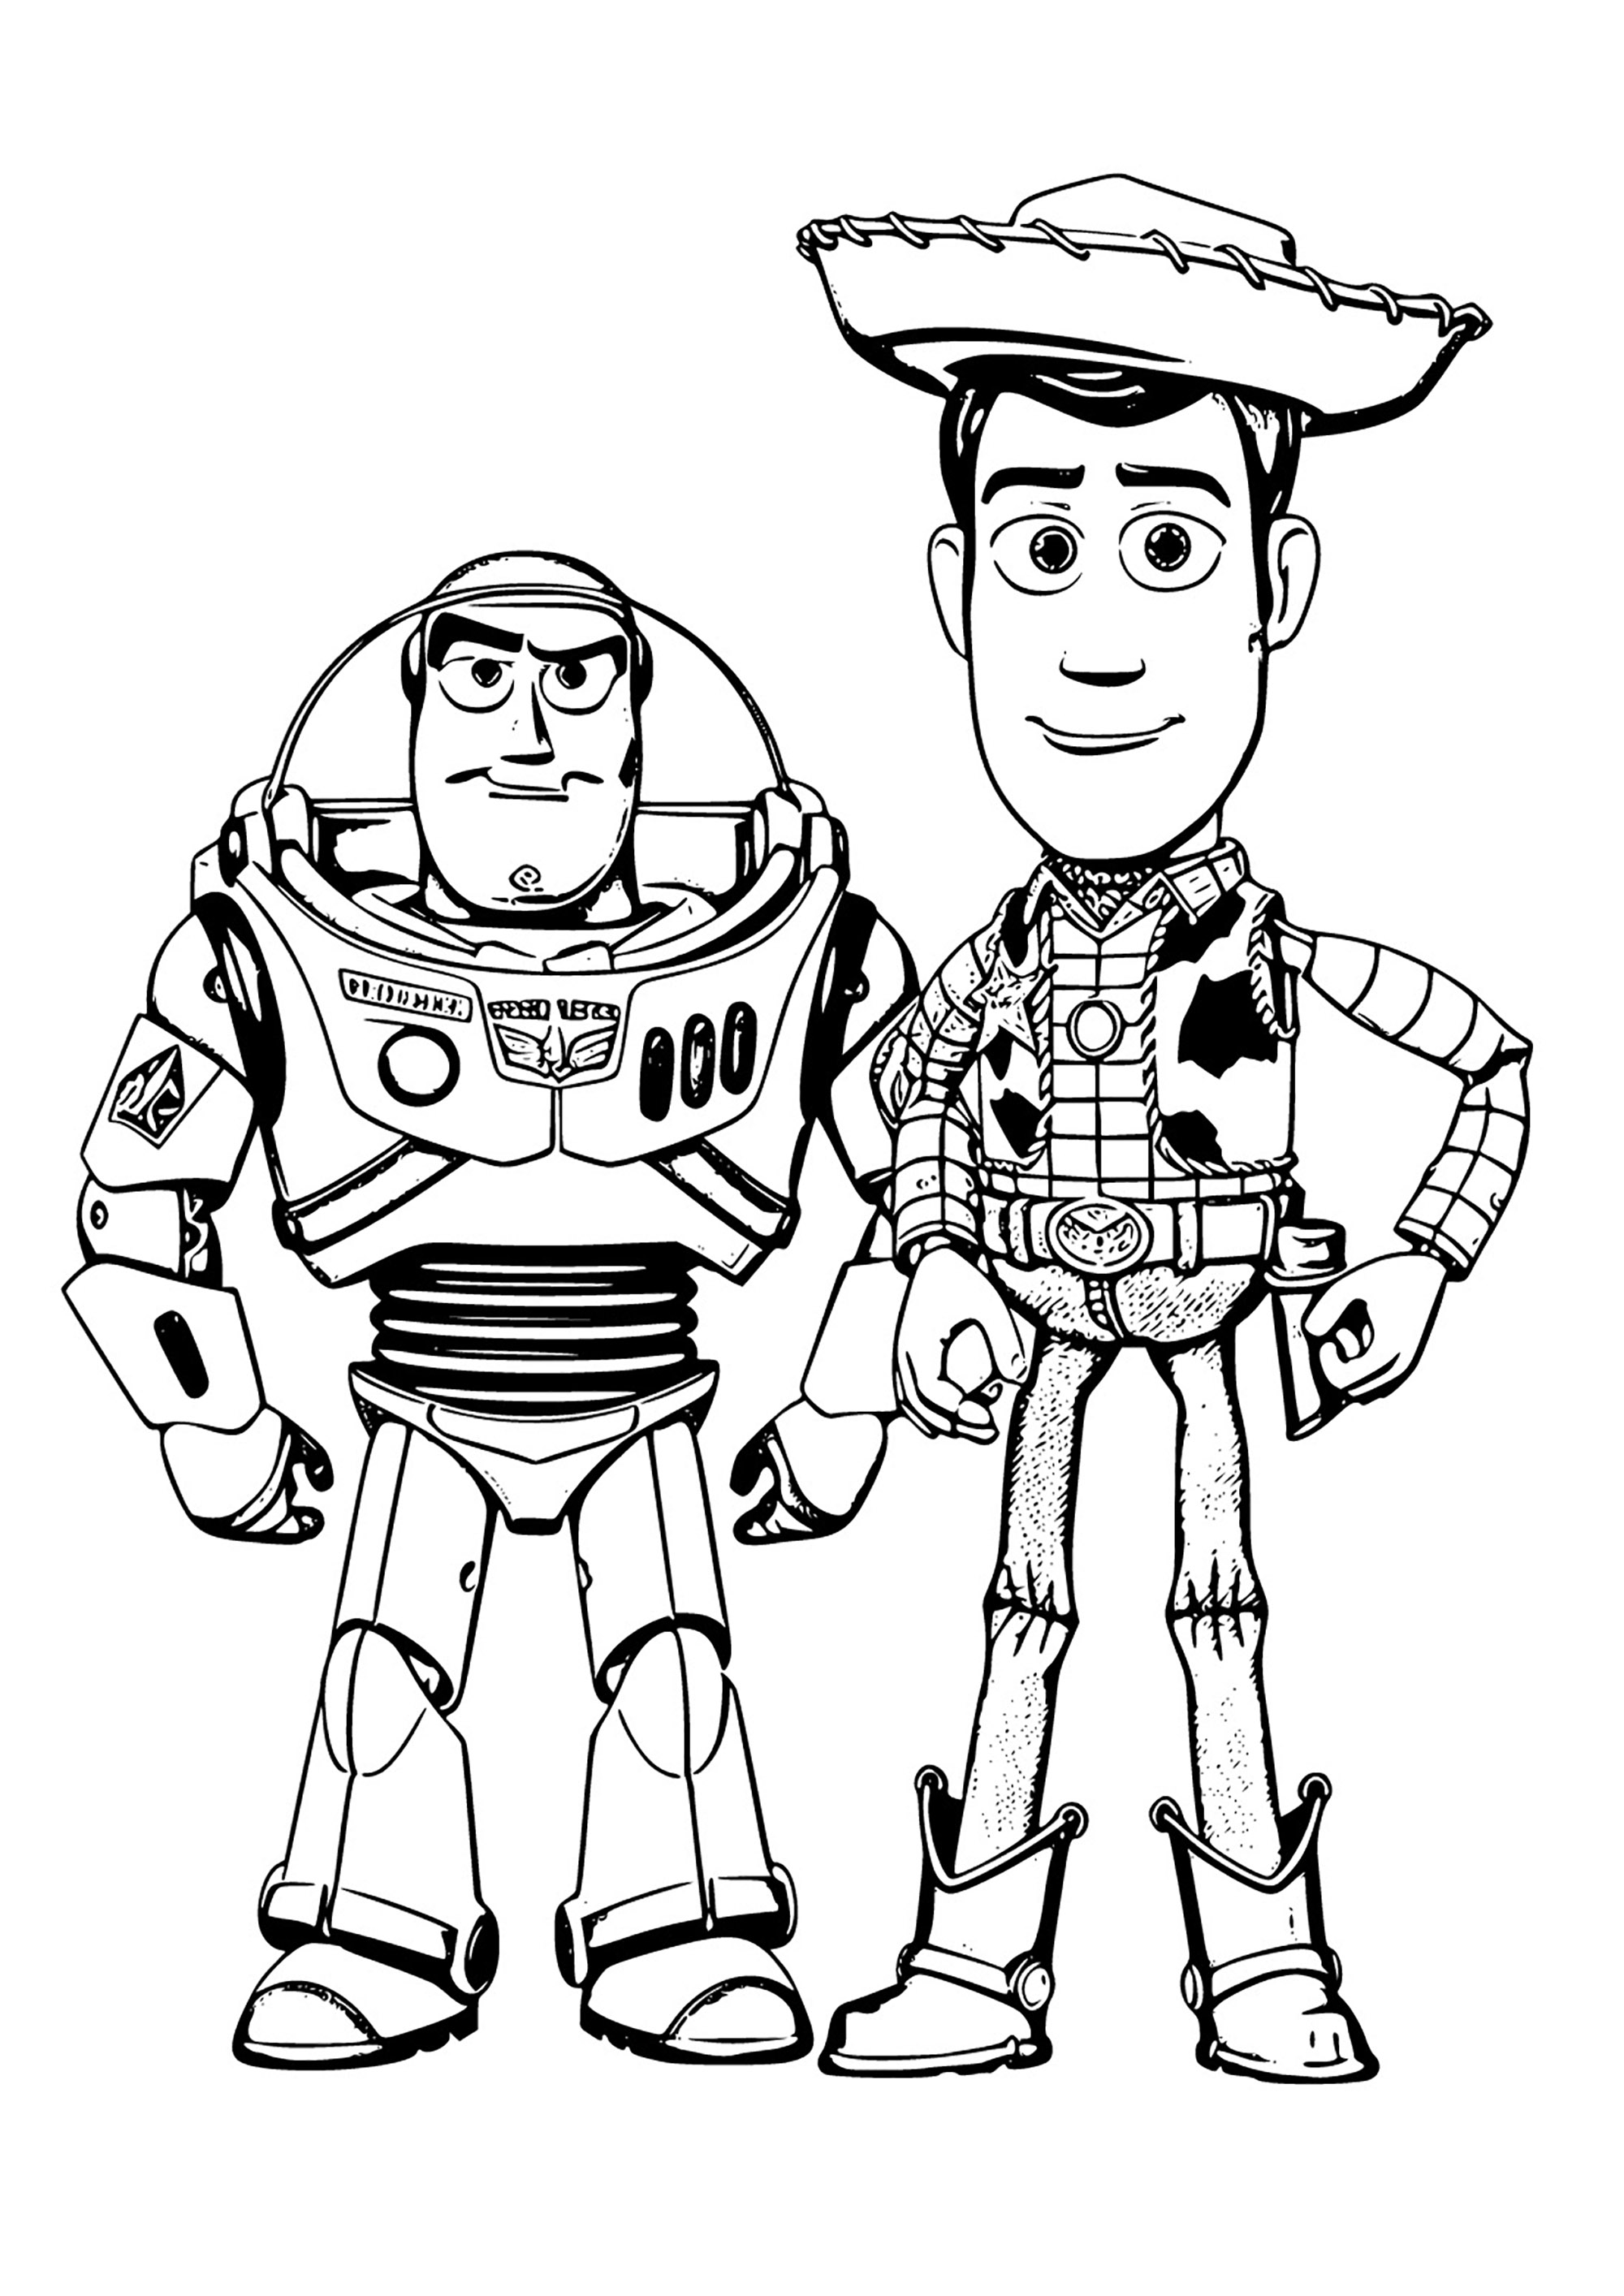 Woody and Buzz coloring pages. A design with a very particular style, far from the 3D representation of films